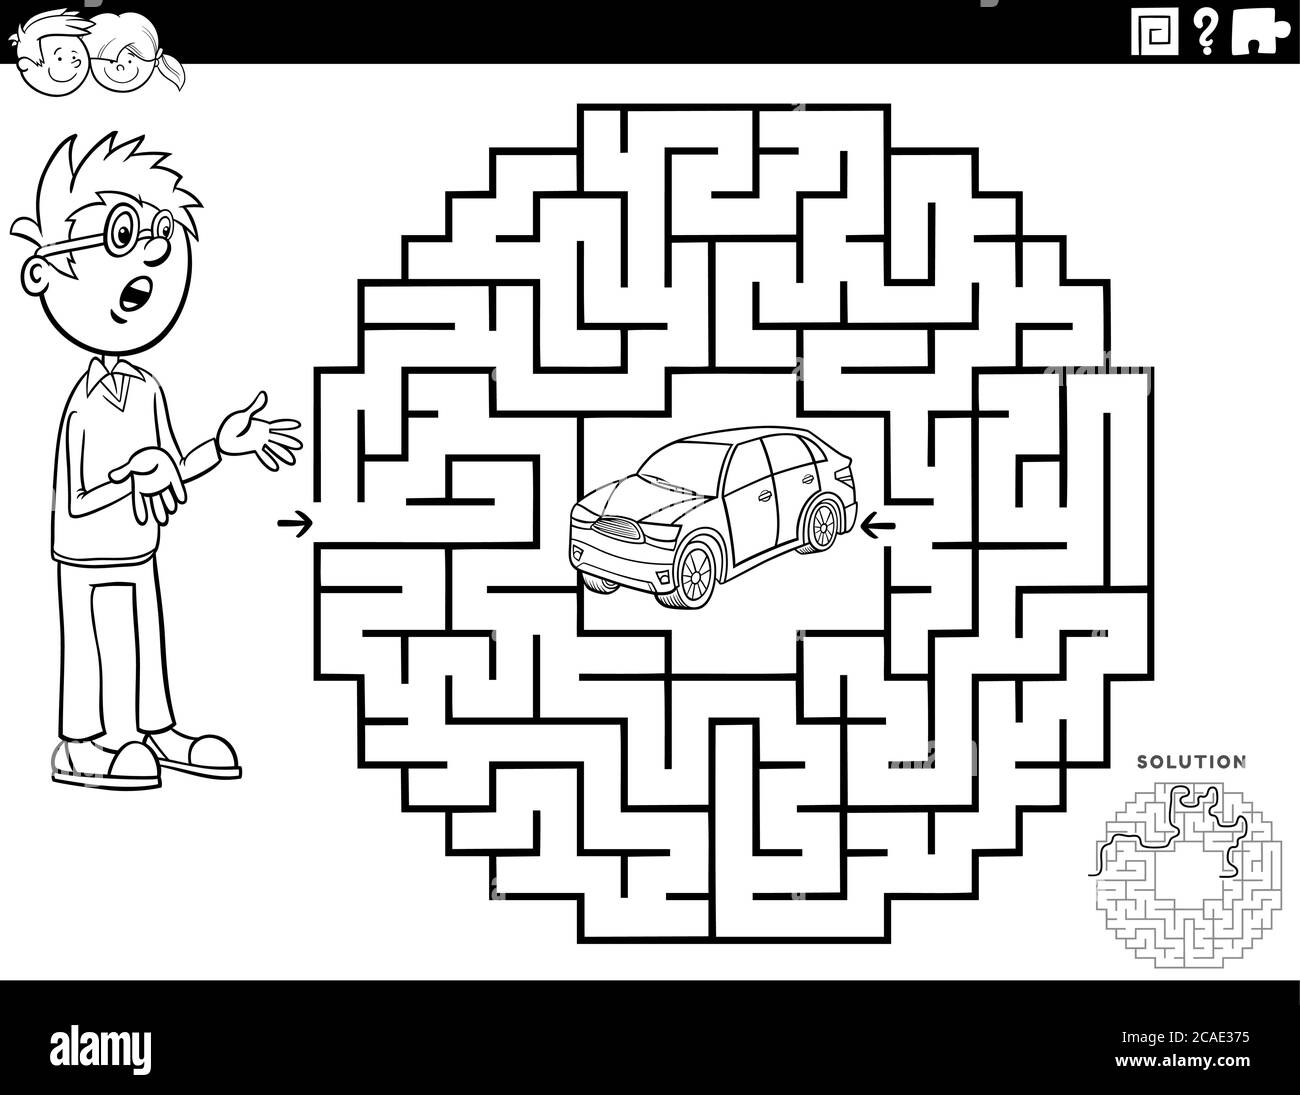 Black and white cartoon illustration of educational maze puzzle game for children with boy character and toy car coloring book page stock vector image art